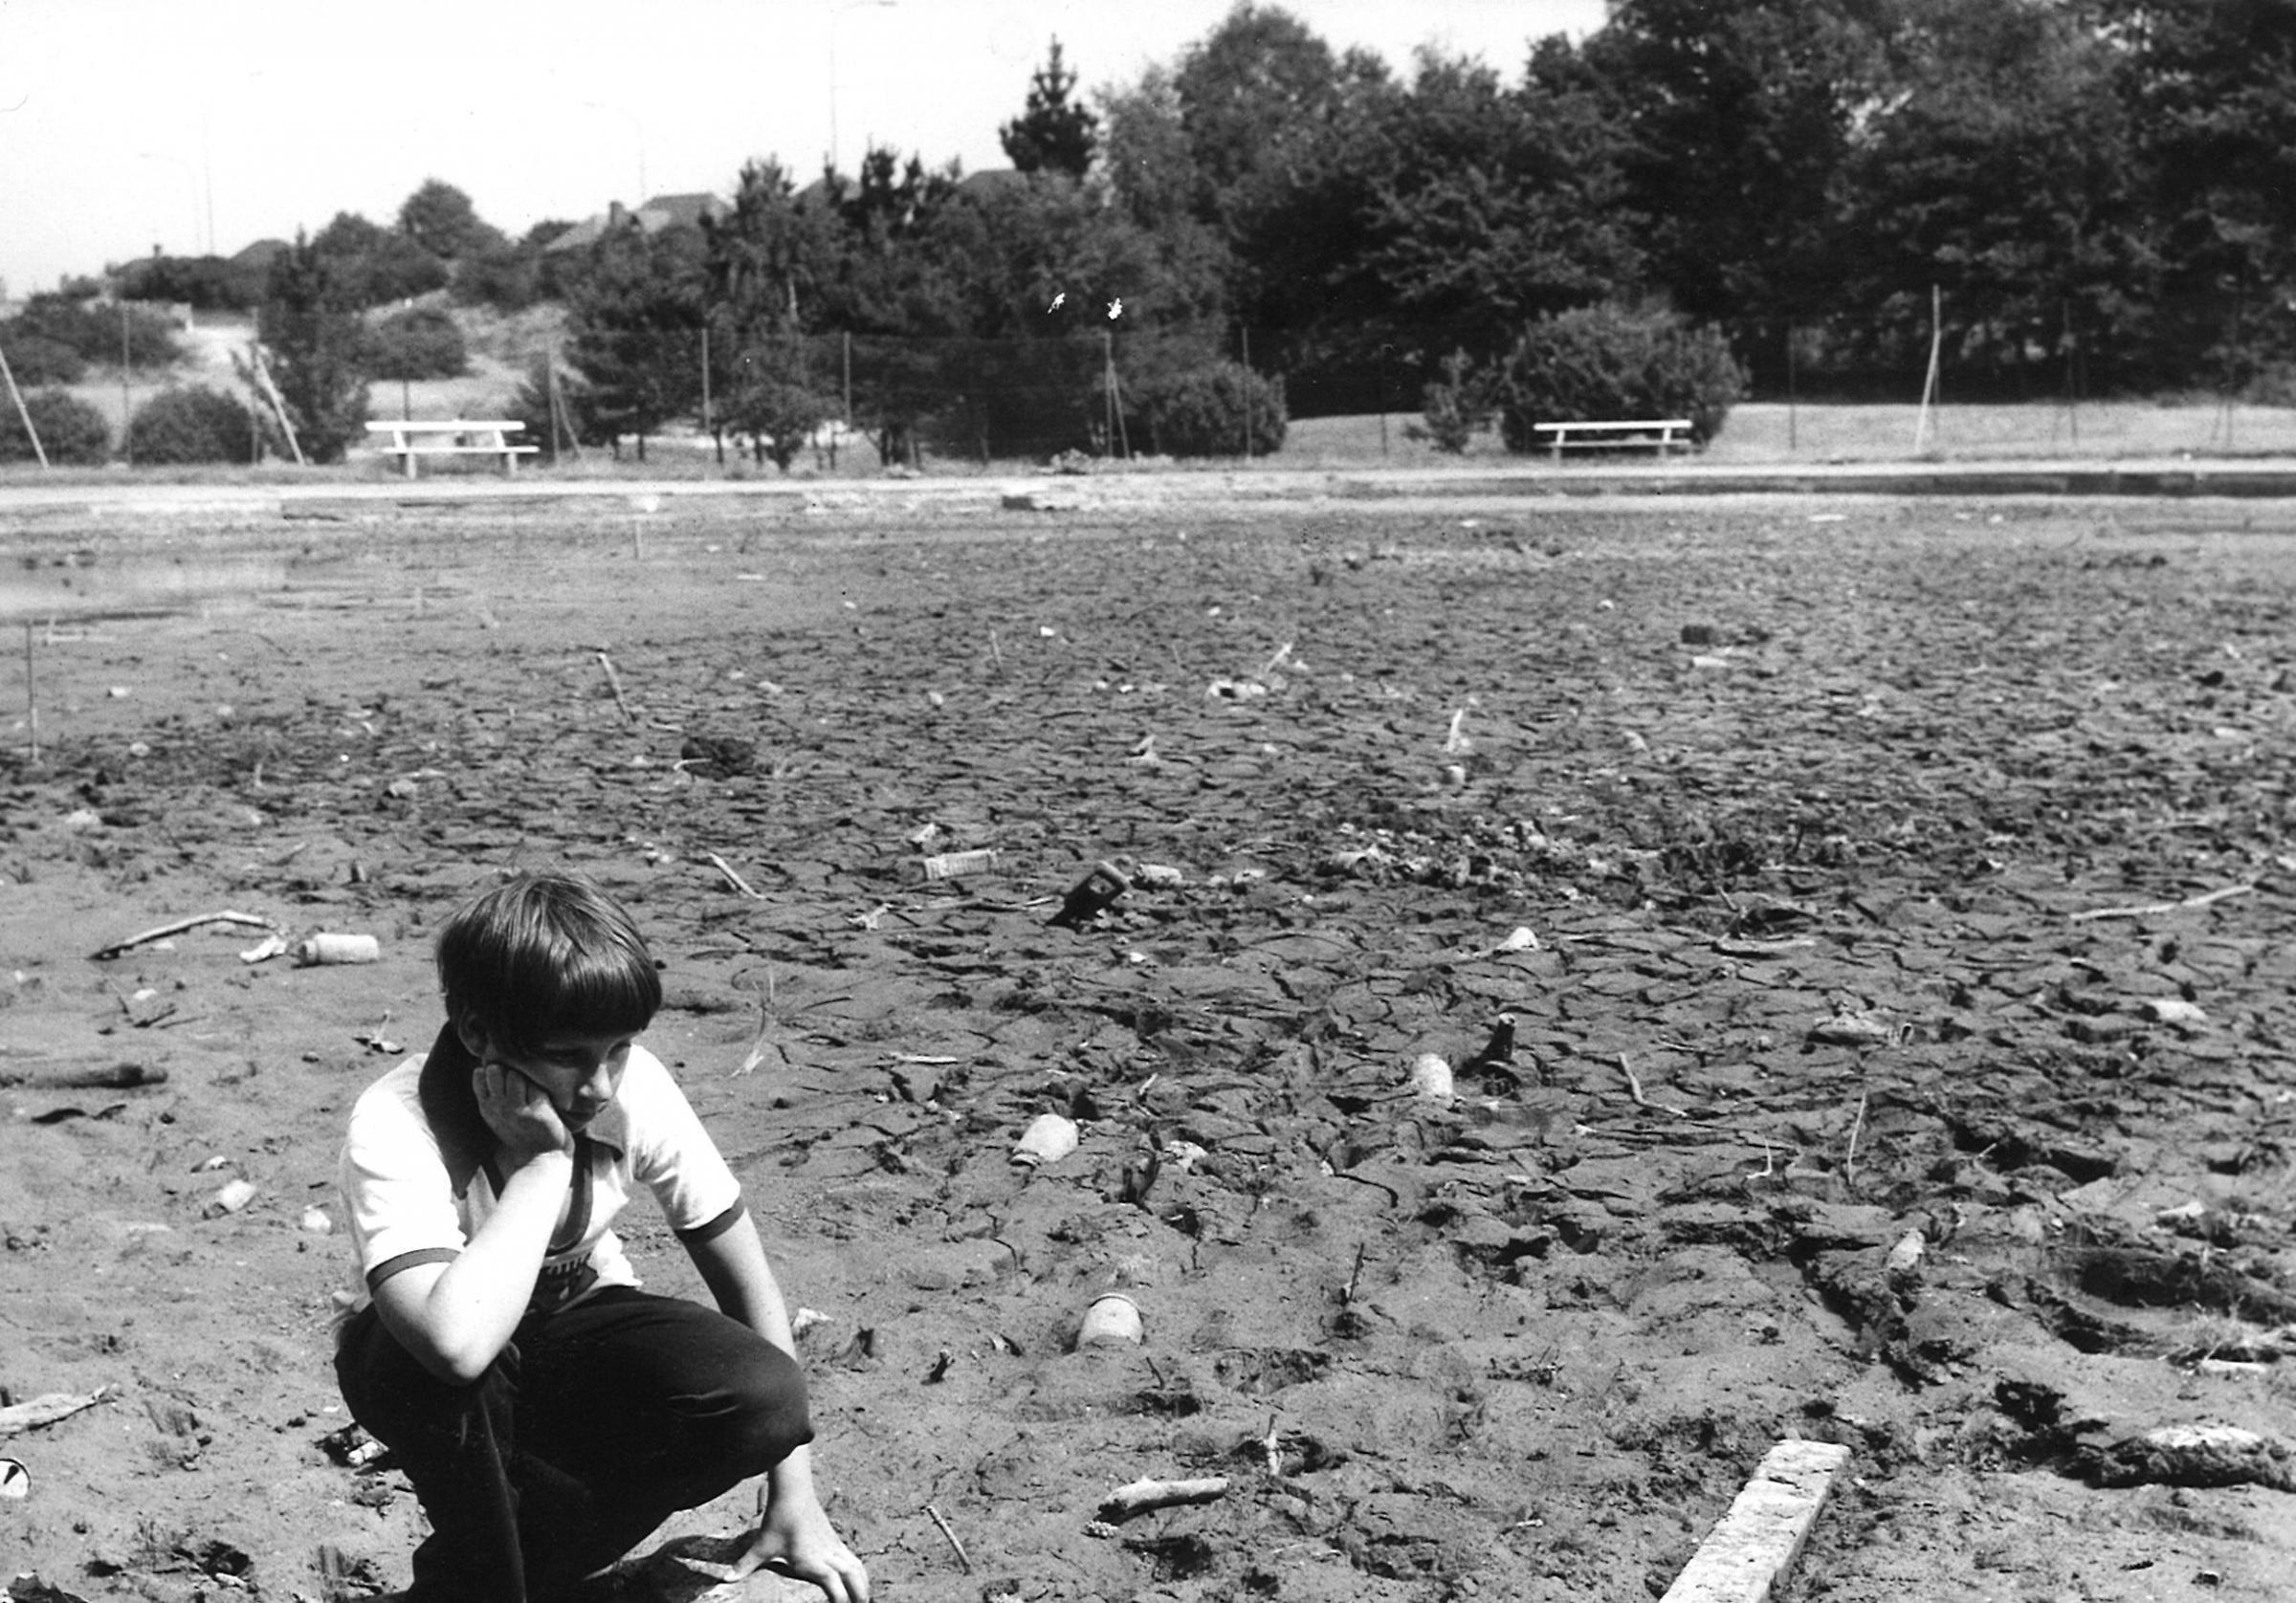 Stephen Bicknell, 11, by the pond at Queens Park golf course which ran dry for the first time in 40 years during a severe drought in August 1976..